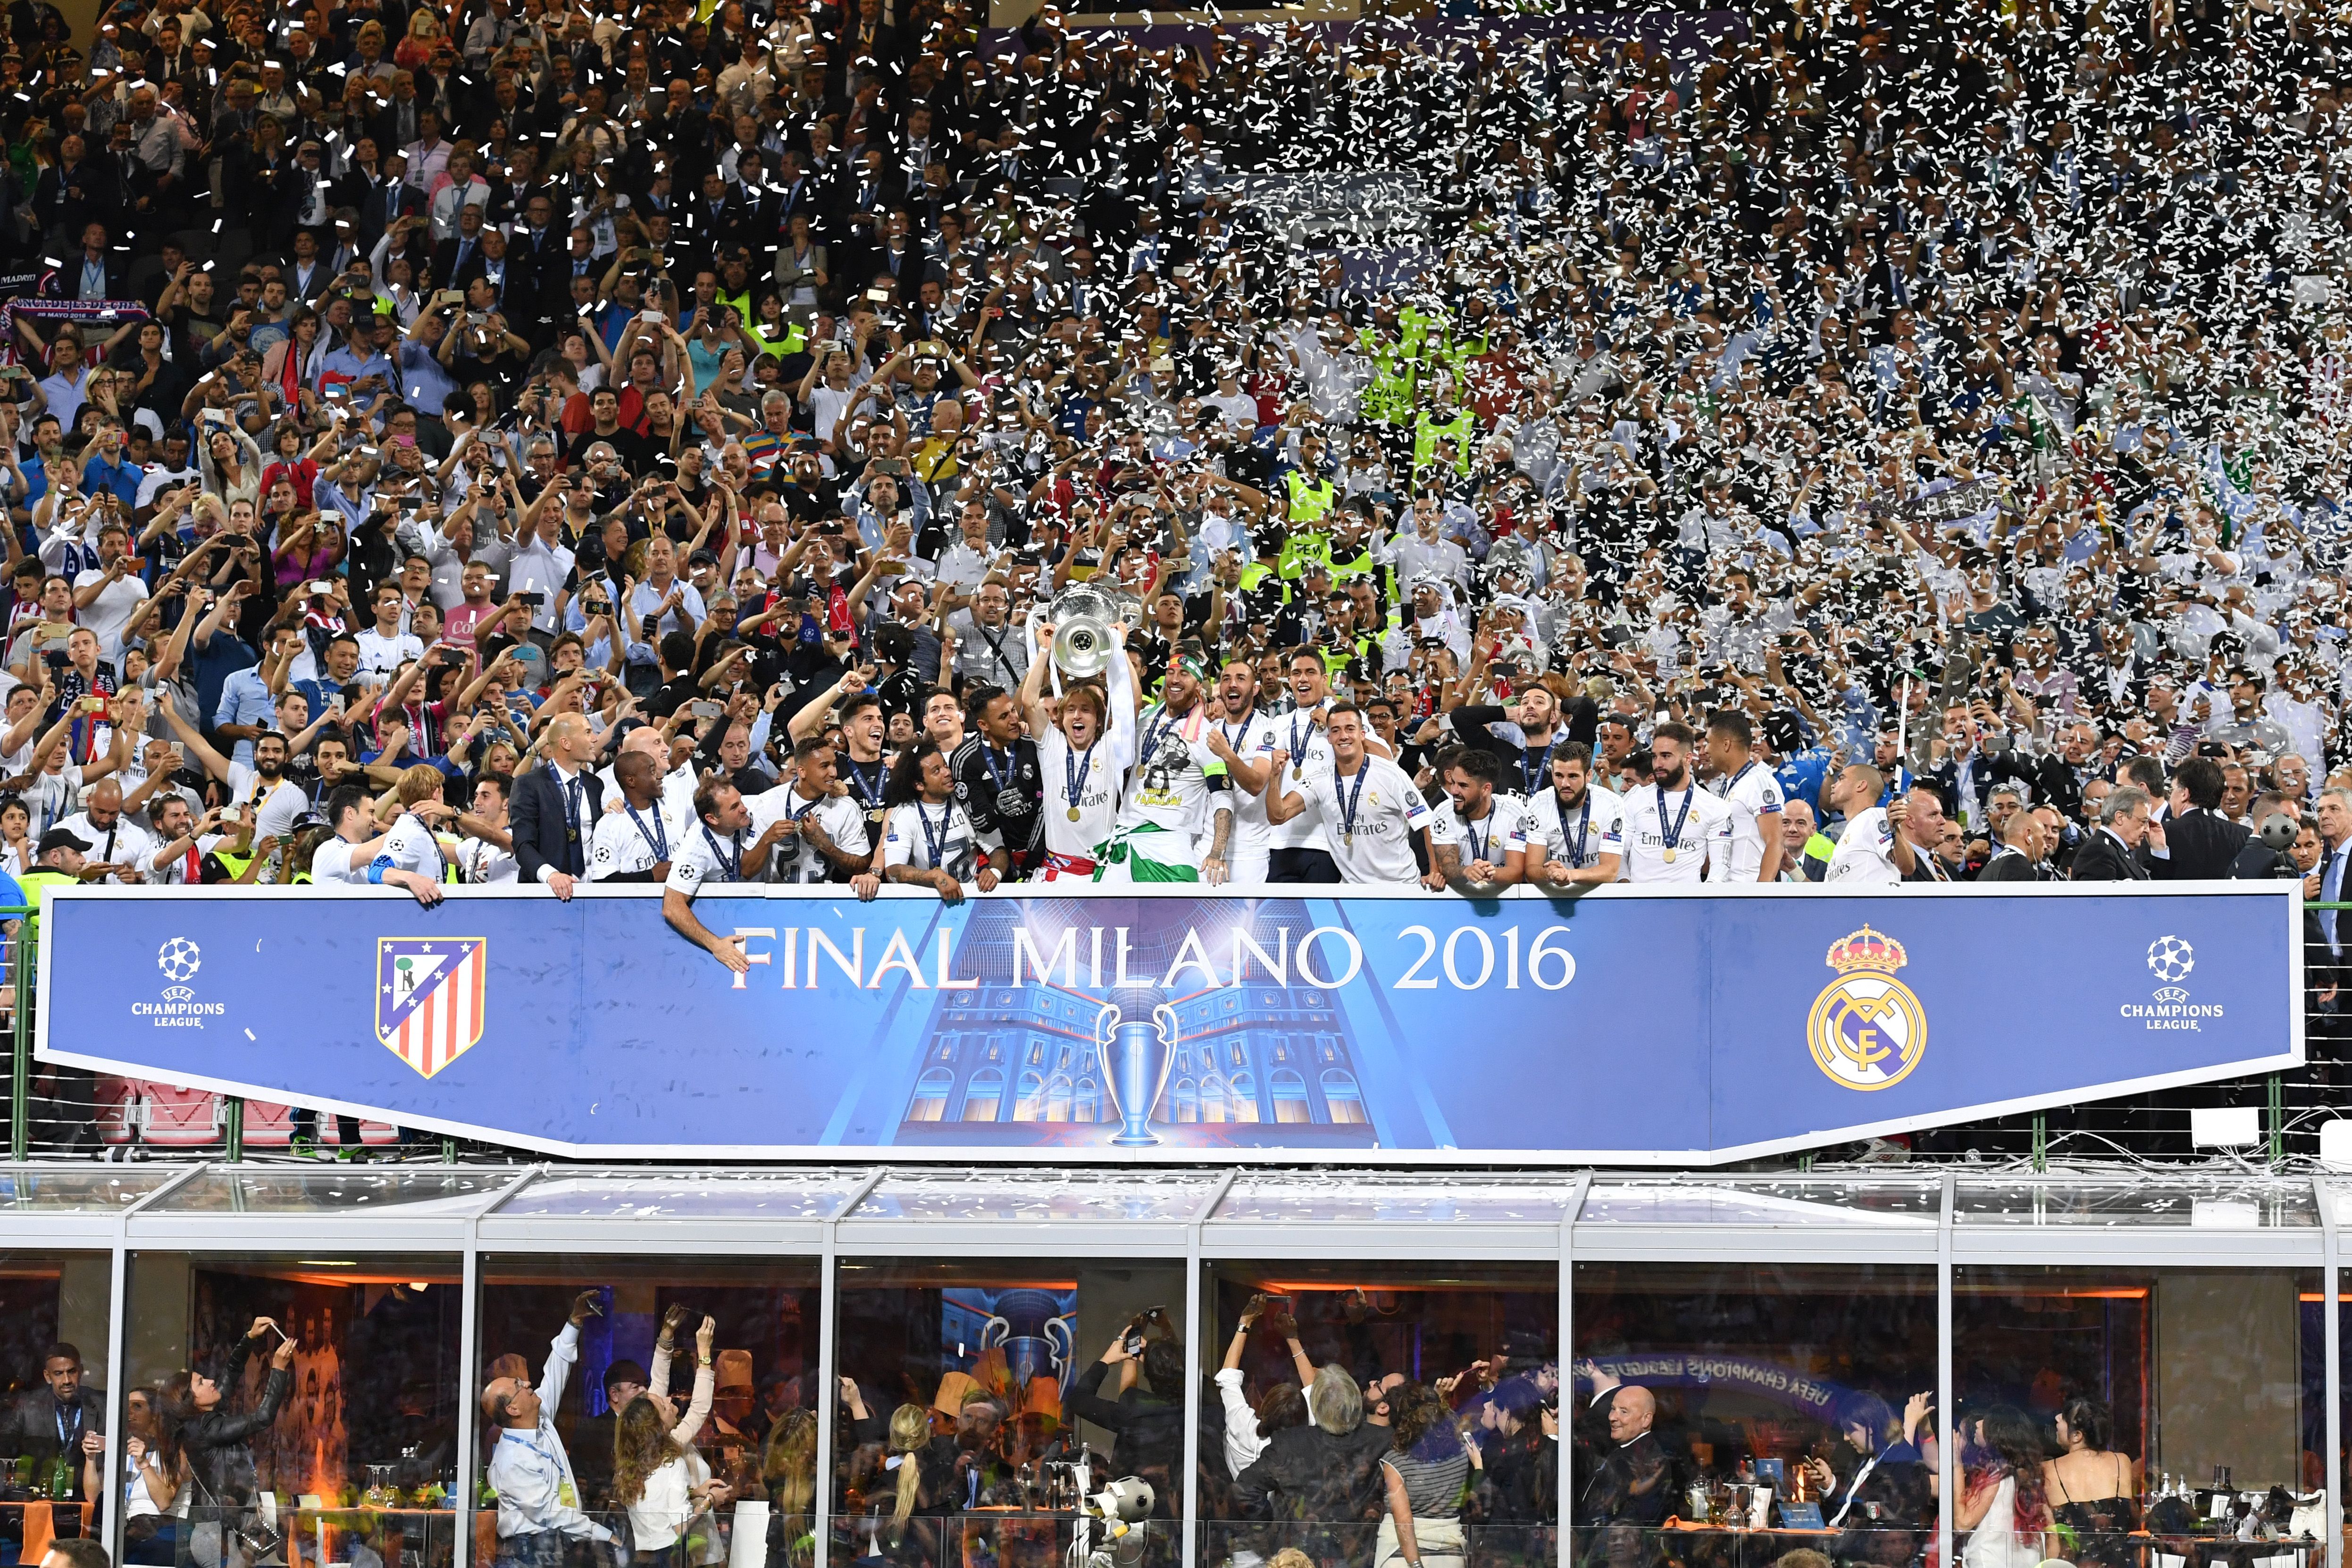 Real Madrid's Croatian midfielder Luka Modric (C) lifts the trophy as Real Madrid players celebrate winning the UEFA Champions League final football match over Atletico Madrid at San Siro Stadium in Milan, on May 28, 2016. / AFP / GERARD JULIEN        (Photo credit should read GERARD JULIEN/AFP/Getty Images)